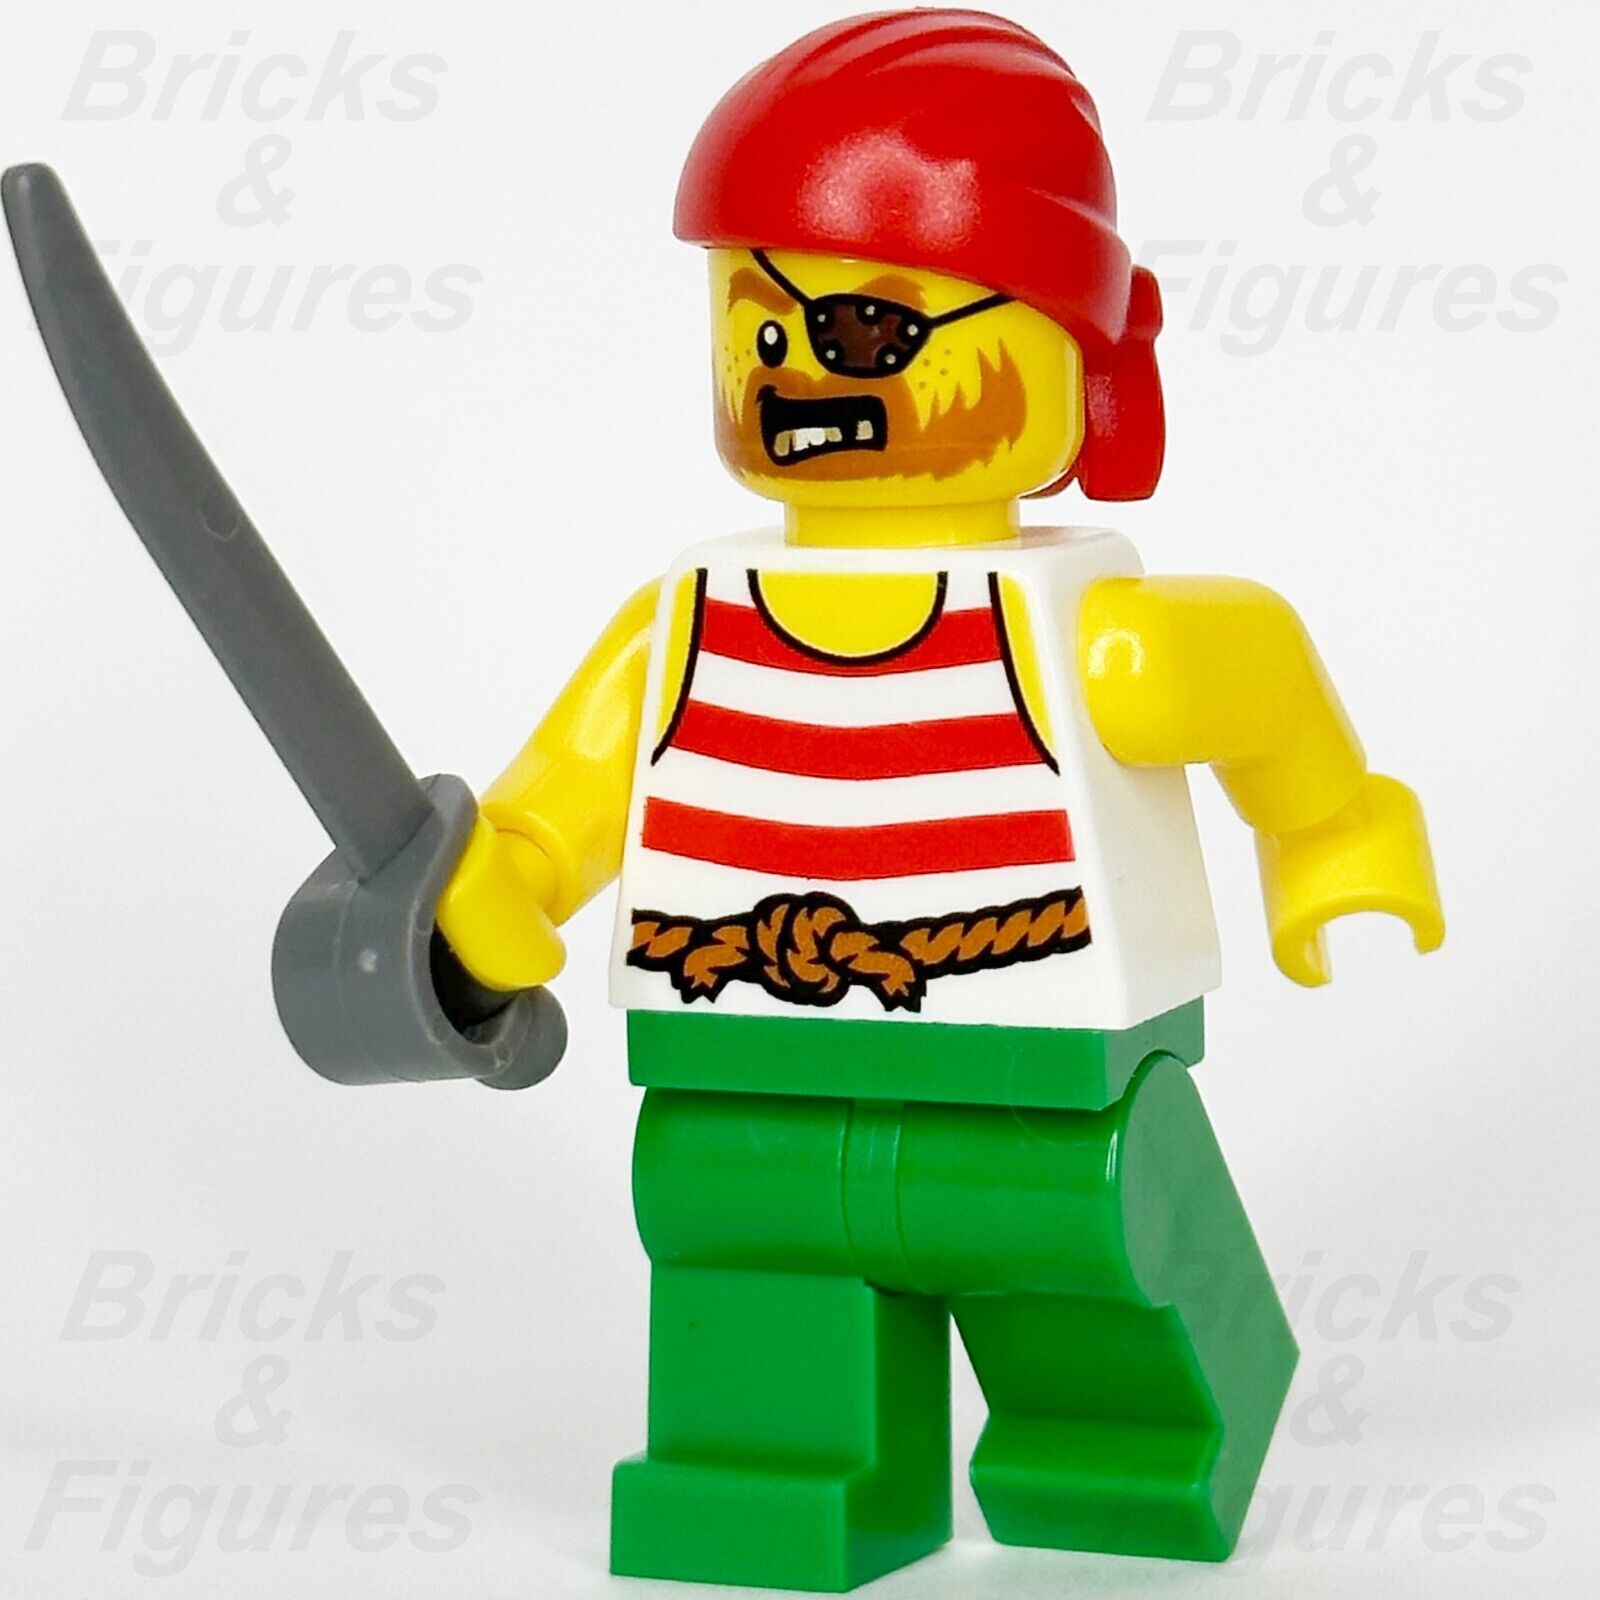 LEGO Pirate Minifigure Red Bandana Icons Pirates Imperial Soldiers 10320 pi190